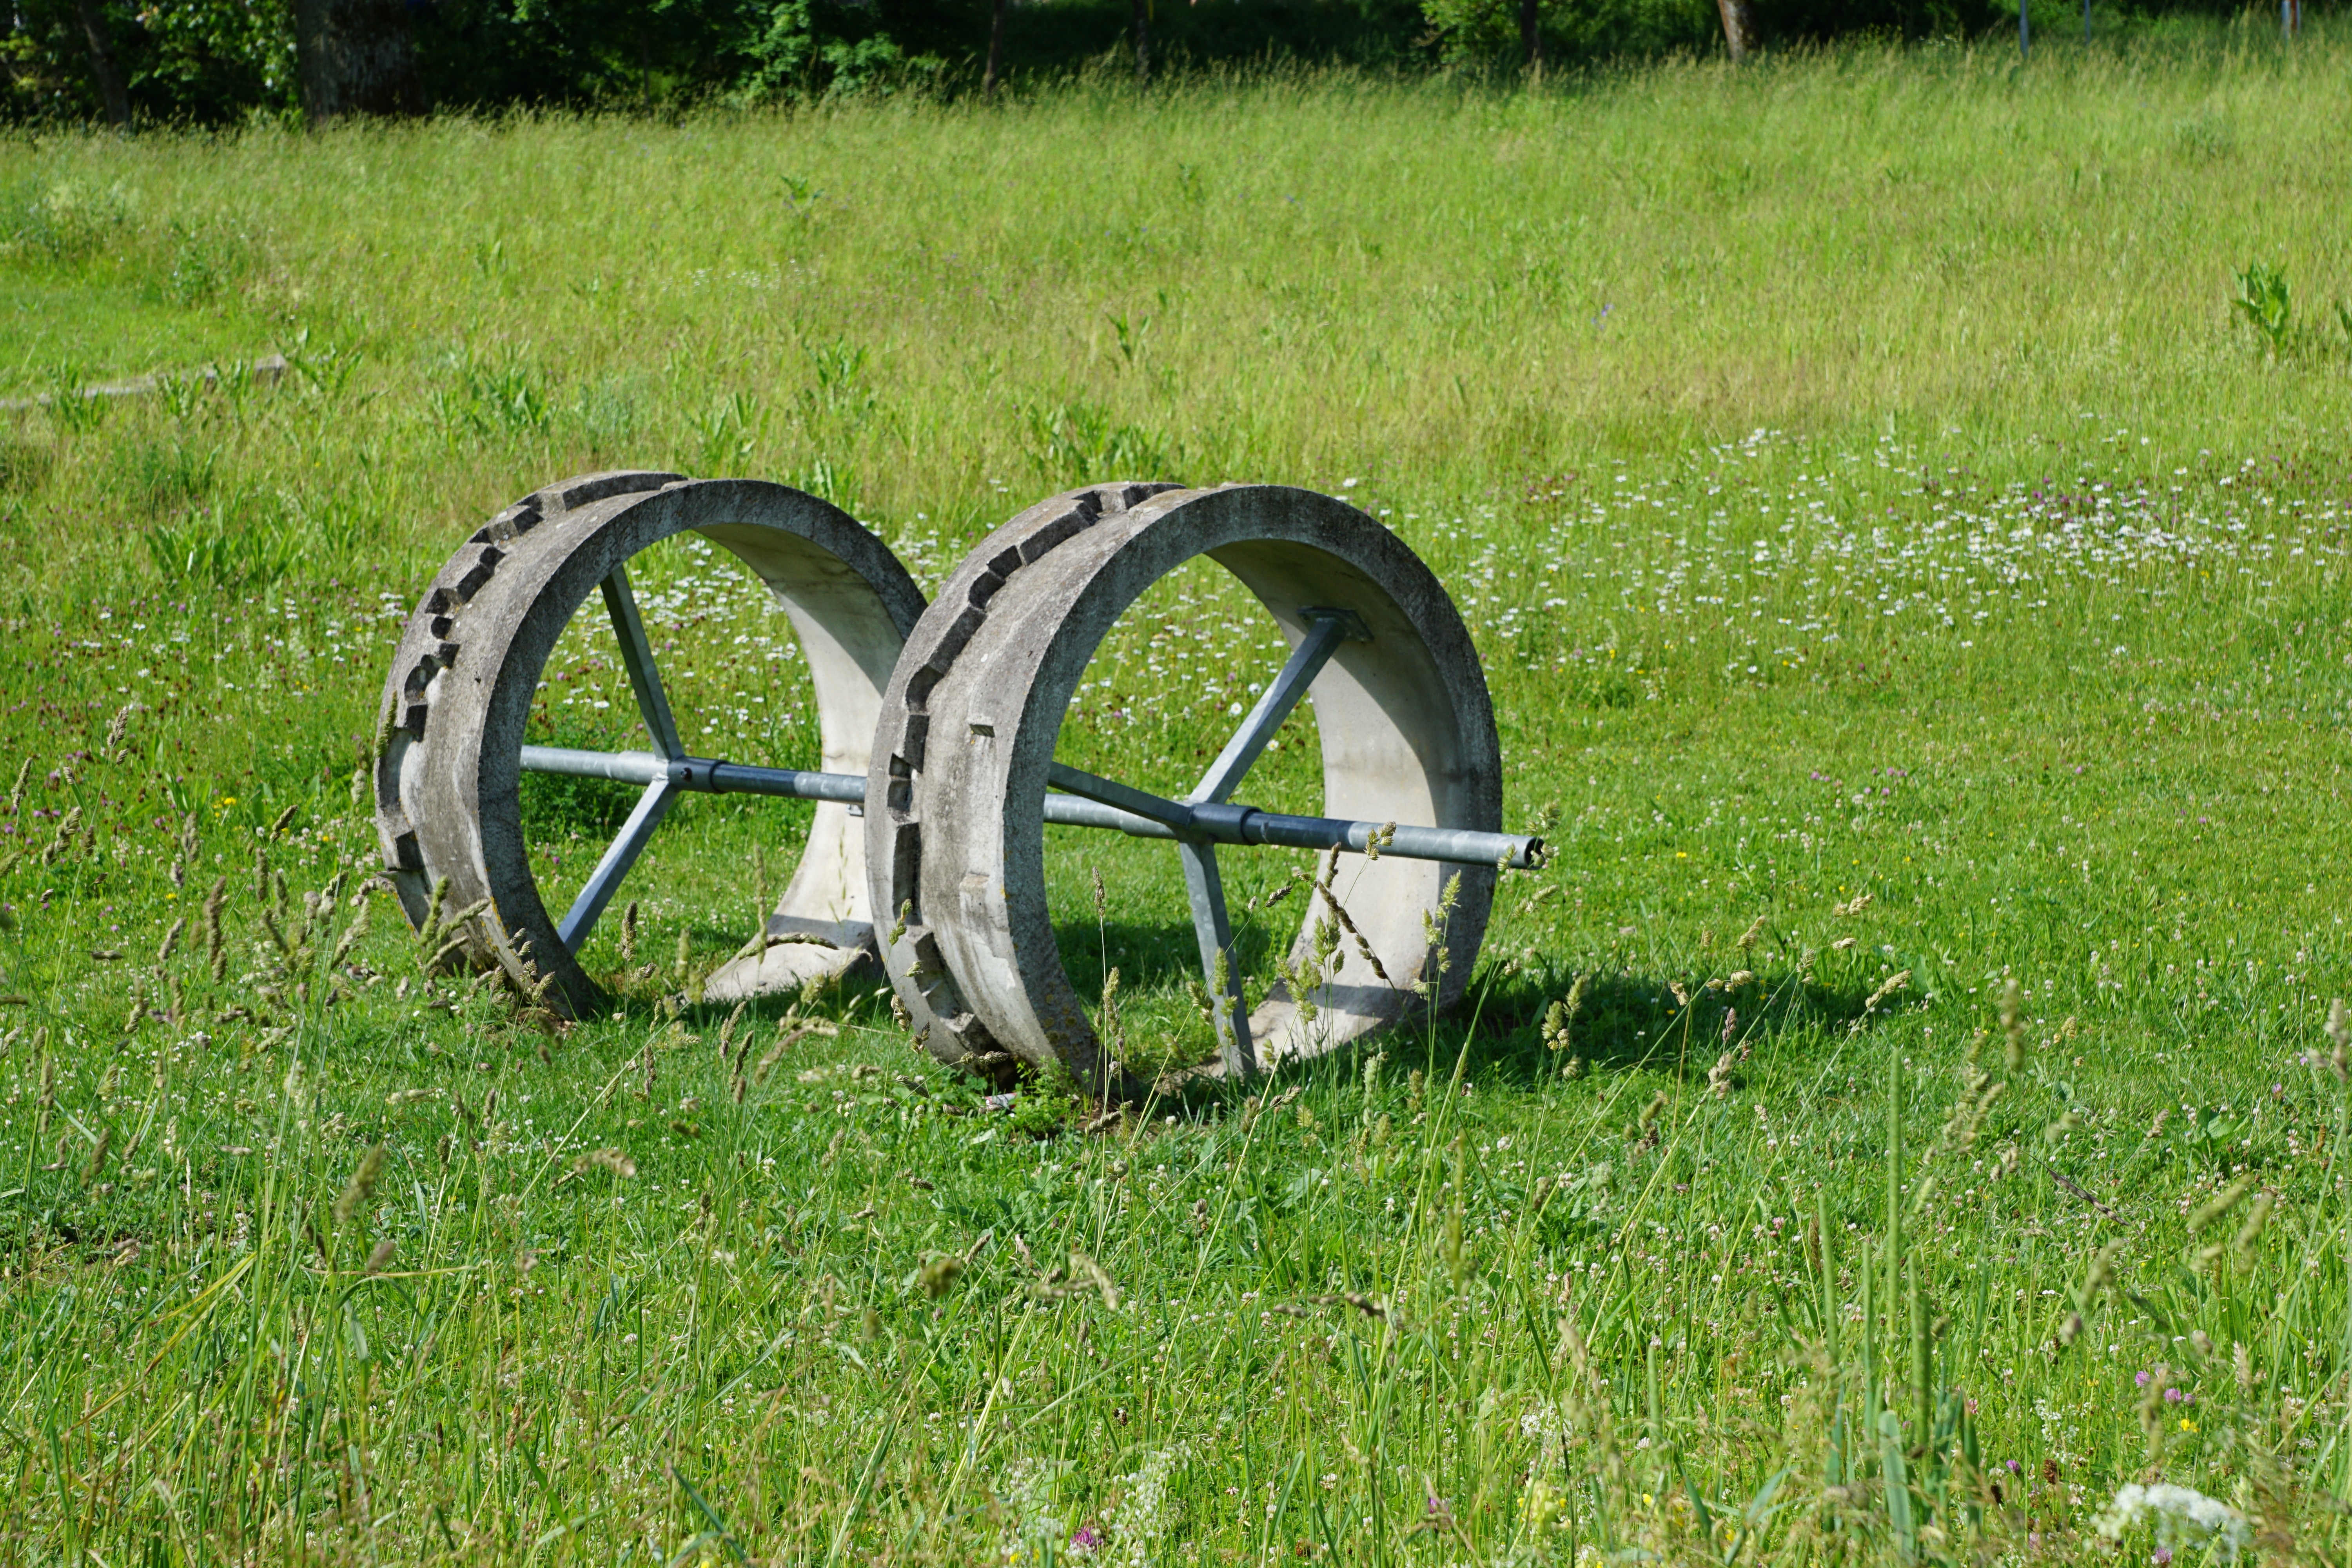 photography of black wheel on green grass field during day time